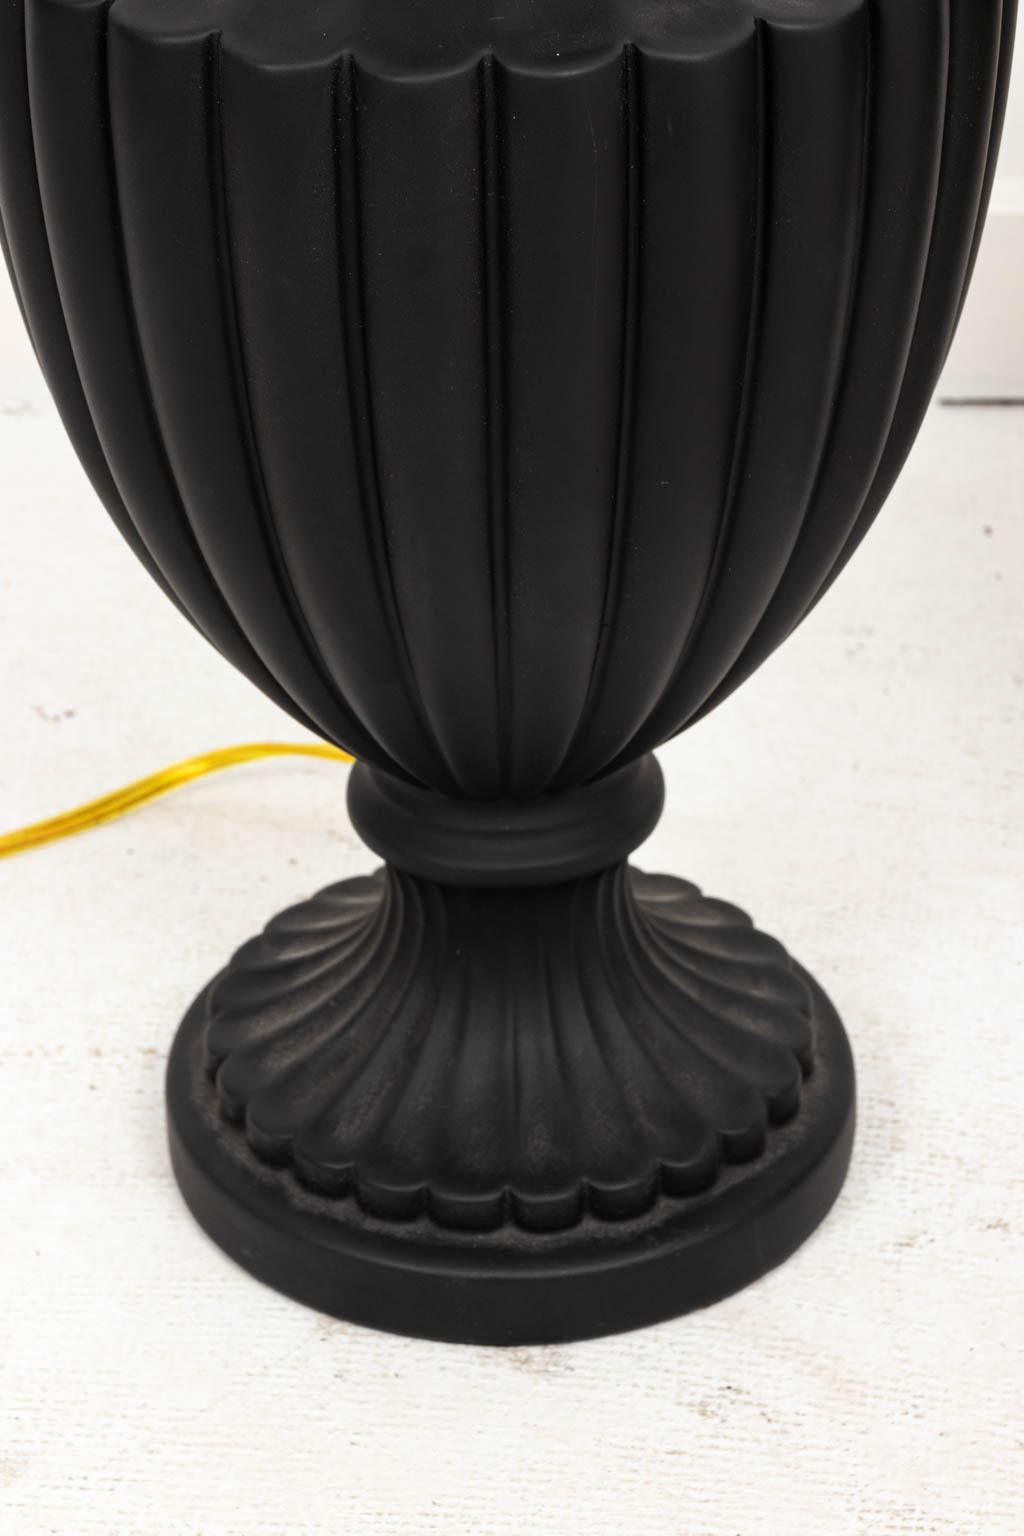 Pair of Wedgwood style black basalt ware urn lamps with reeded detail in ceramic, circa 1980s. Please note of wear consistent with age including minor finish loss. Made in the United States. Shades not included.